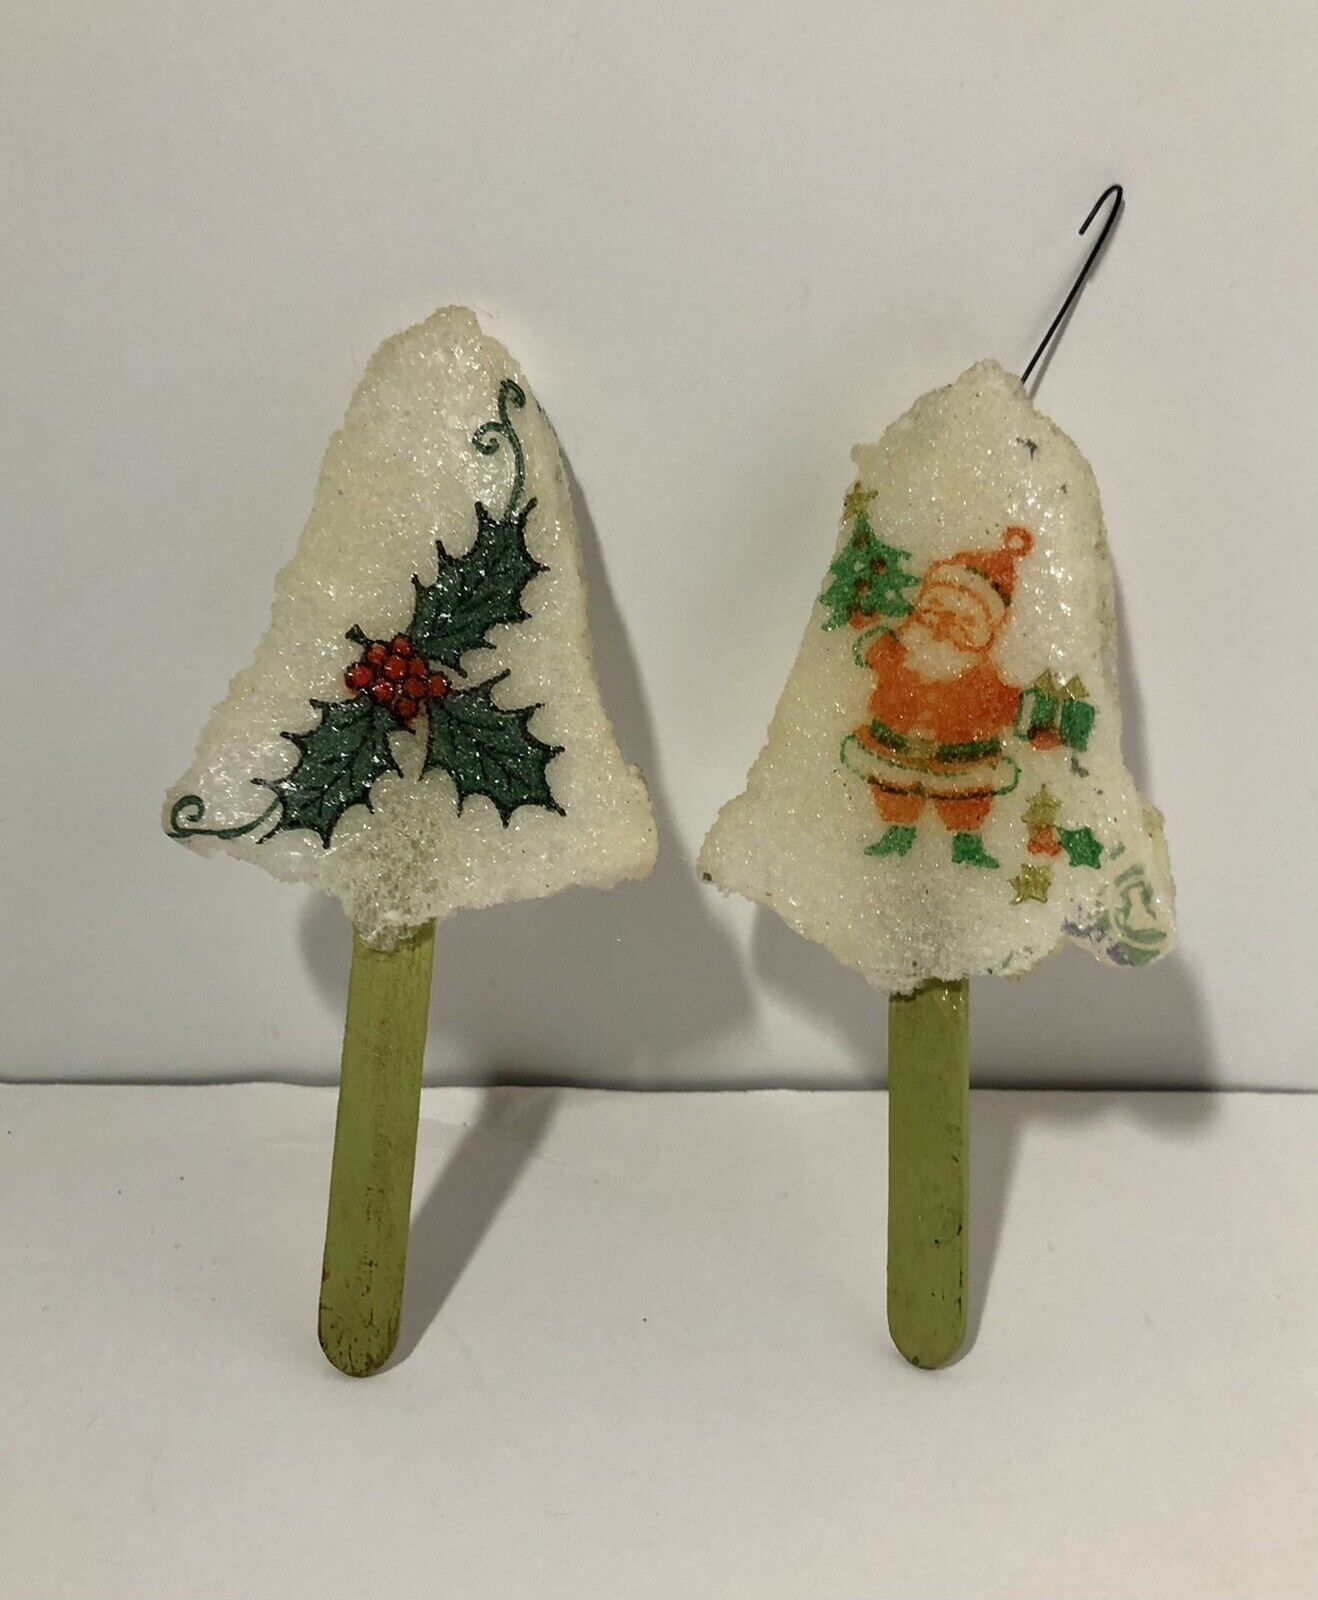 Antique Popsicle Mold Christmas Ornaments Handmade Plastic Stamp Ornaments